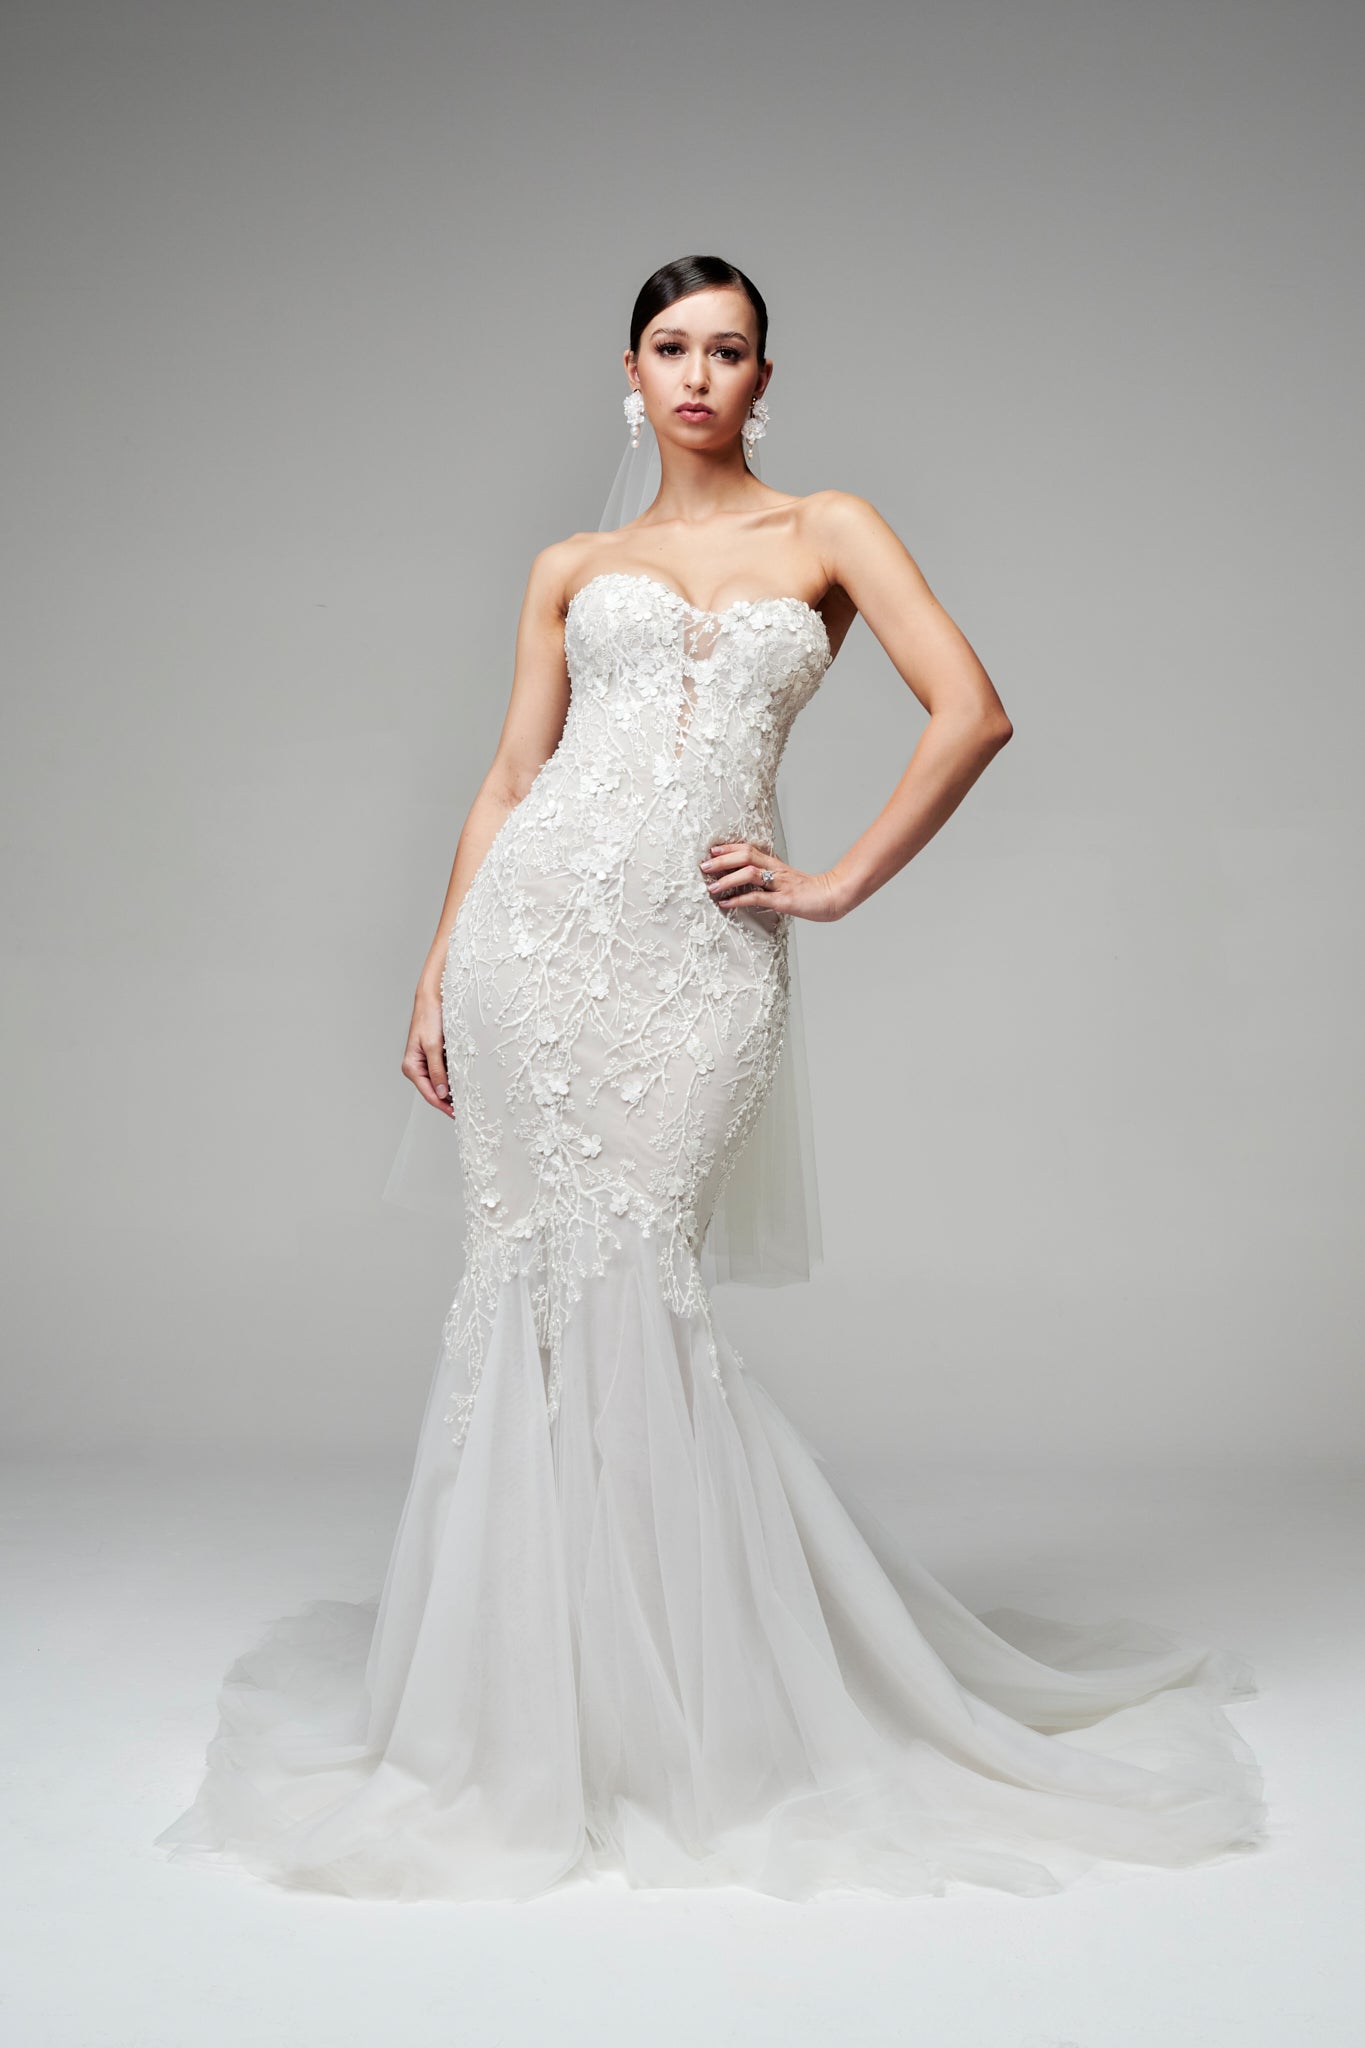 curved neckline and fitted mermaid skirt on bride